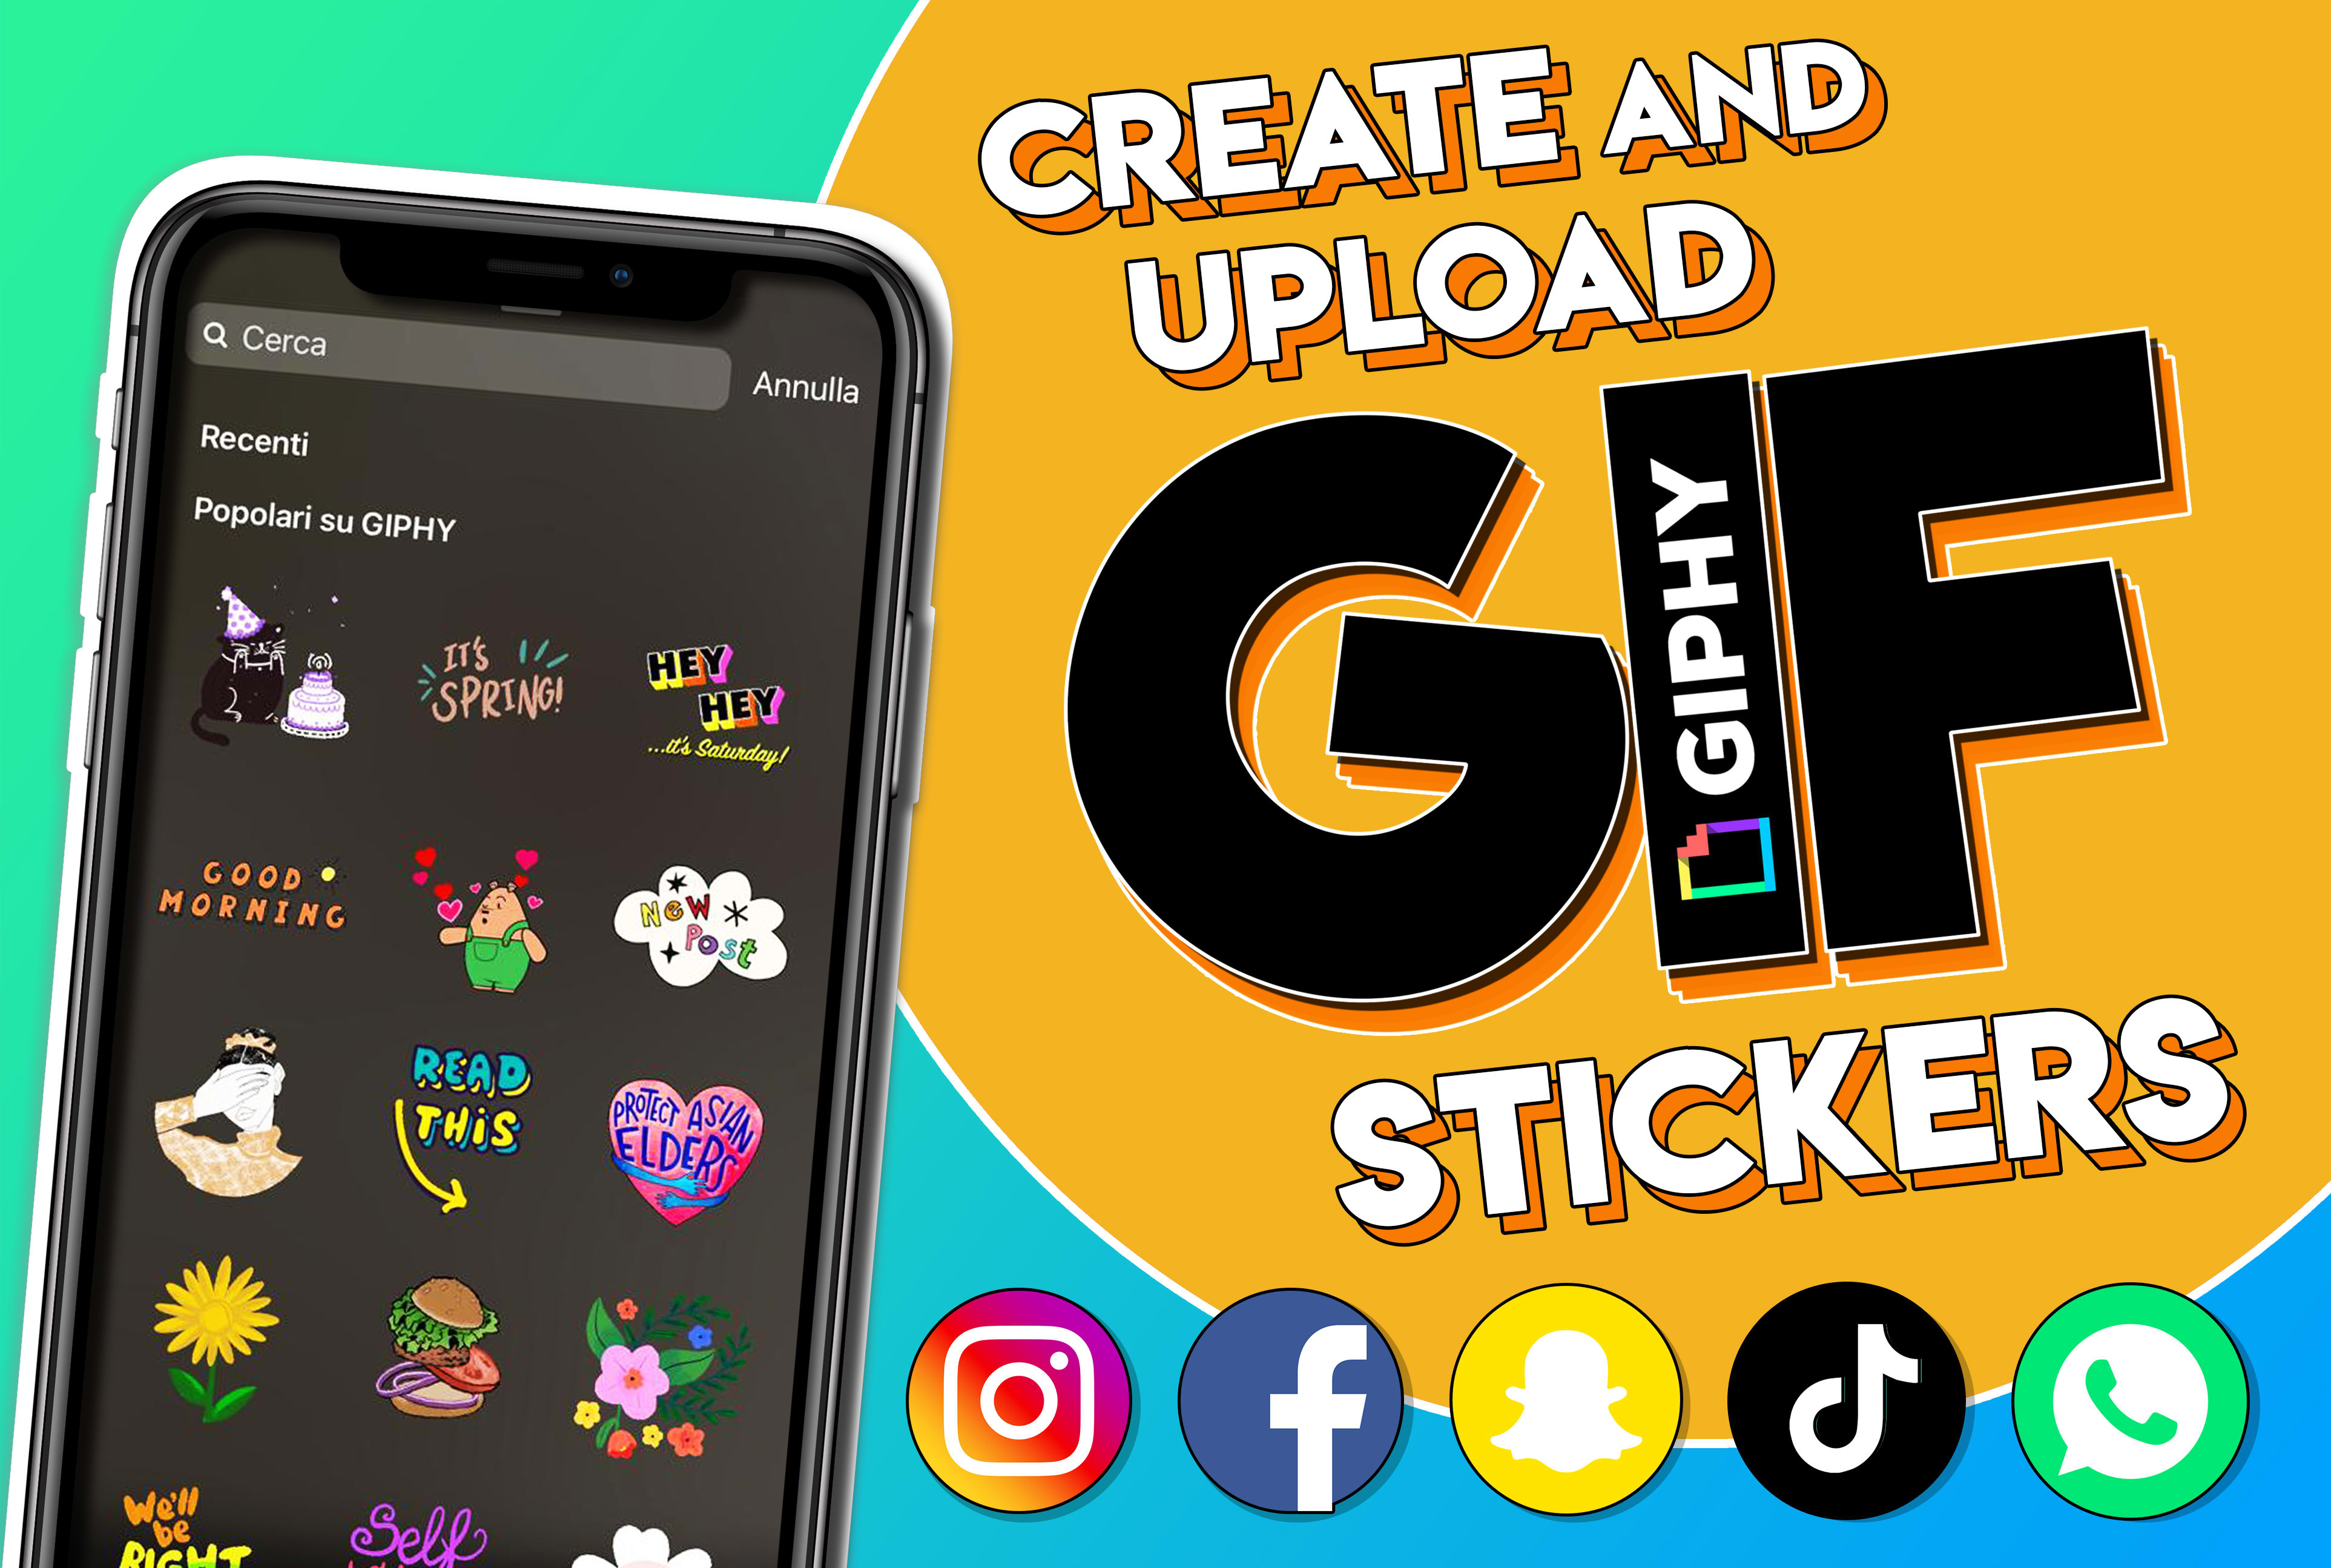 How to Add a GIF to an Instagram Story Using GIPHY